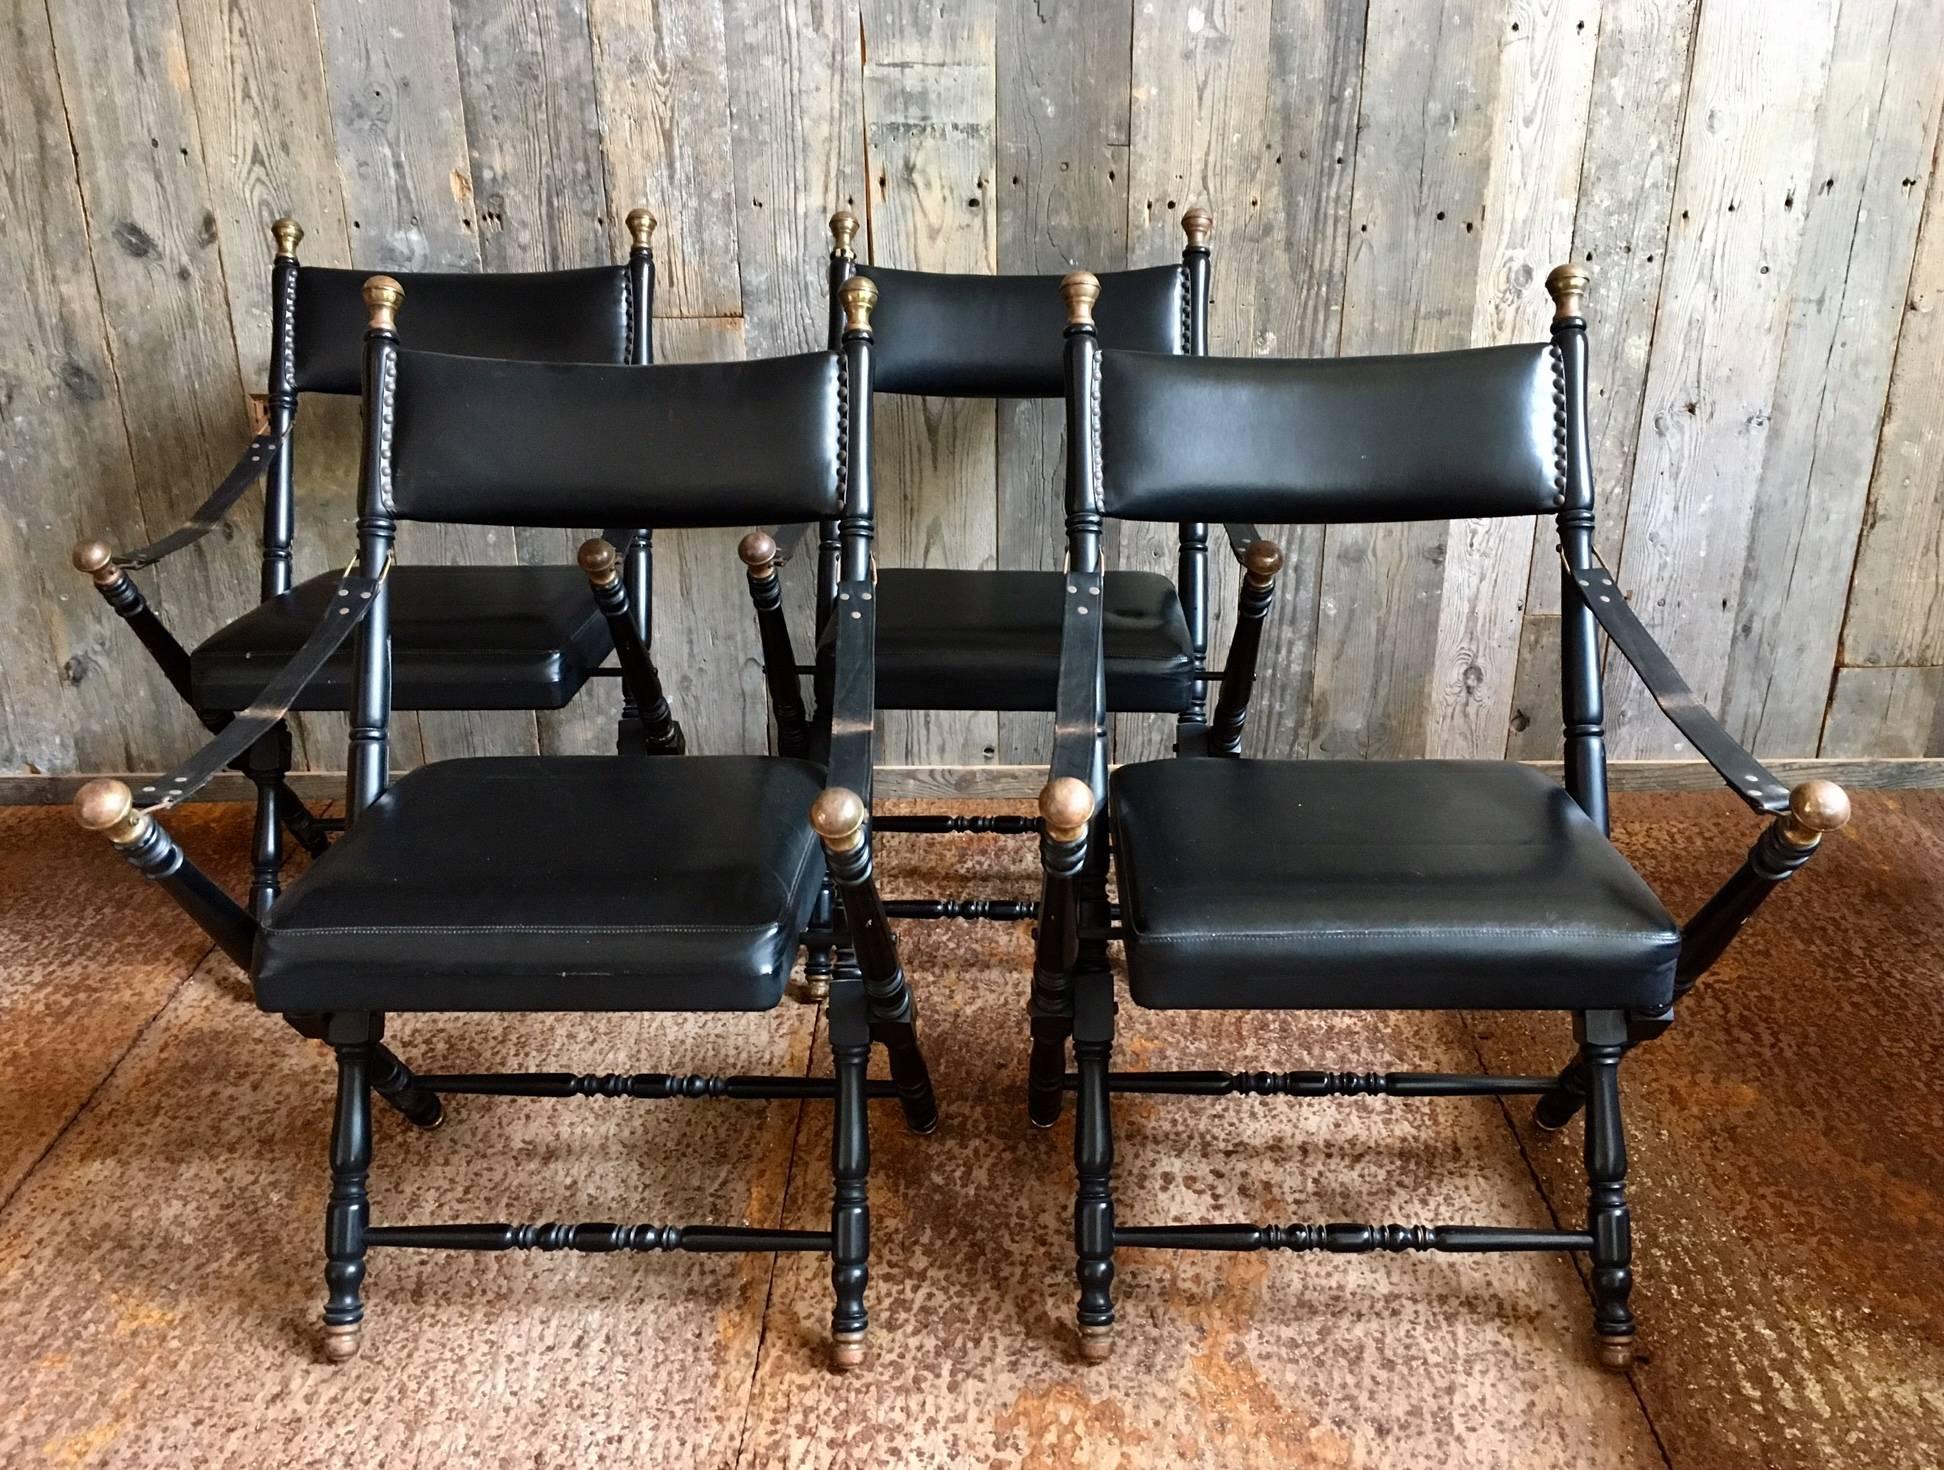 Two black leather Campaign chairs in the style of Maison Jansen.
The leather shows some signs of wear, as does the black paint. This however compliments the vintage feel.

Please note the picture shows 4 chairs, but we have only 2 left. 